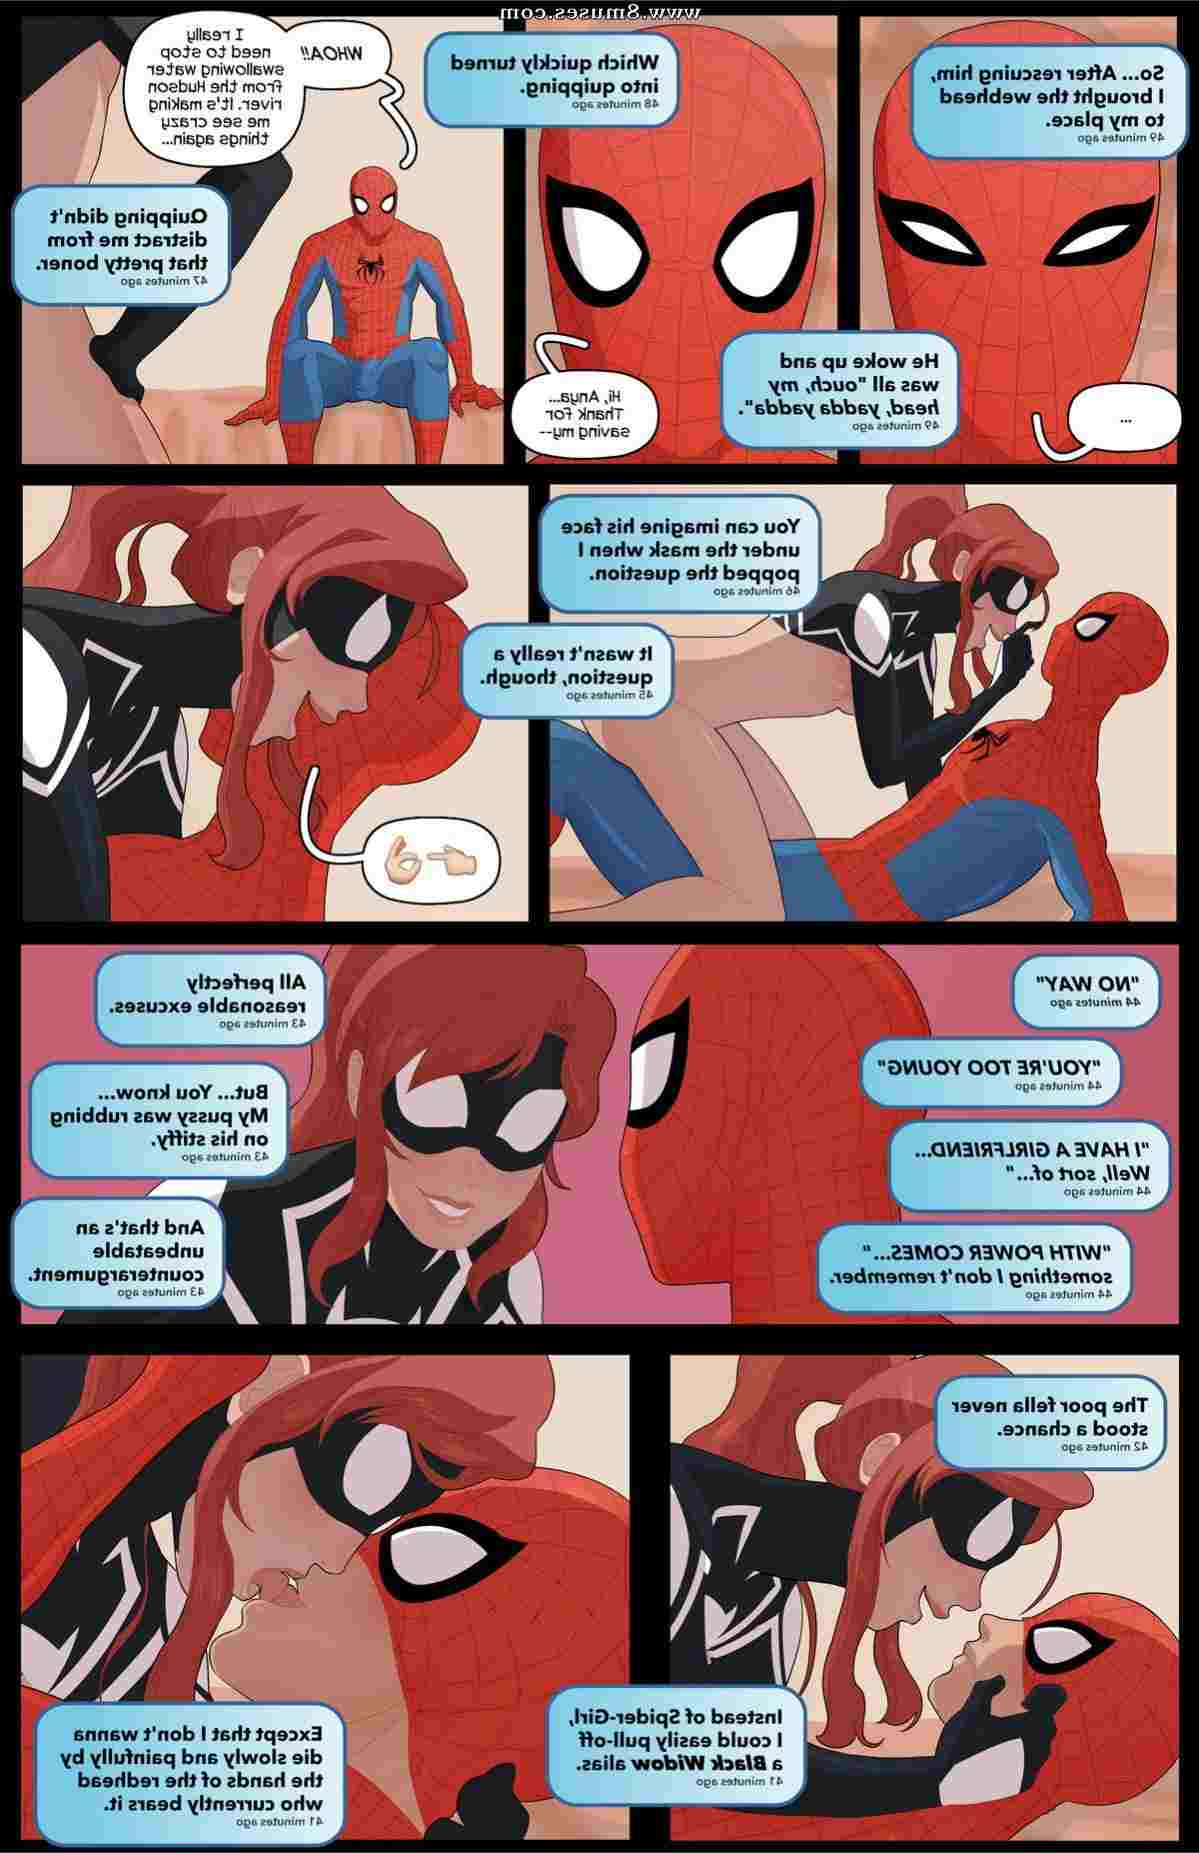 Tracy-Scops-Comics/SpiderFappening SpiderFappening__8muses_-_Sex_and_Porn_Comics_4.jpg